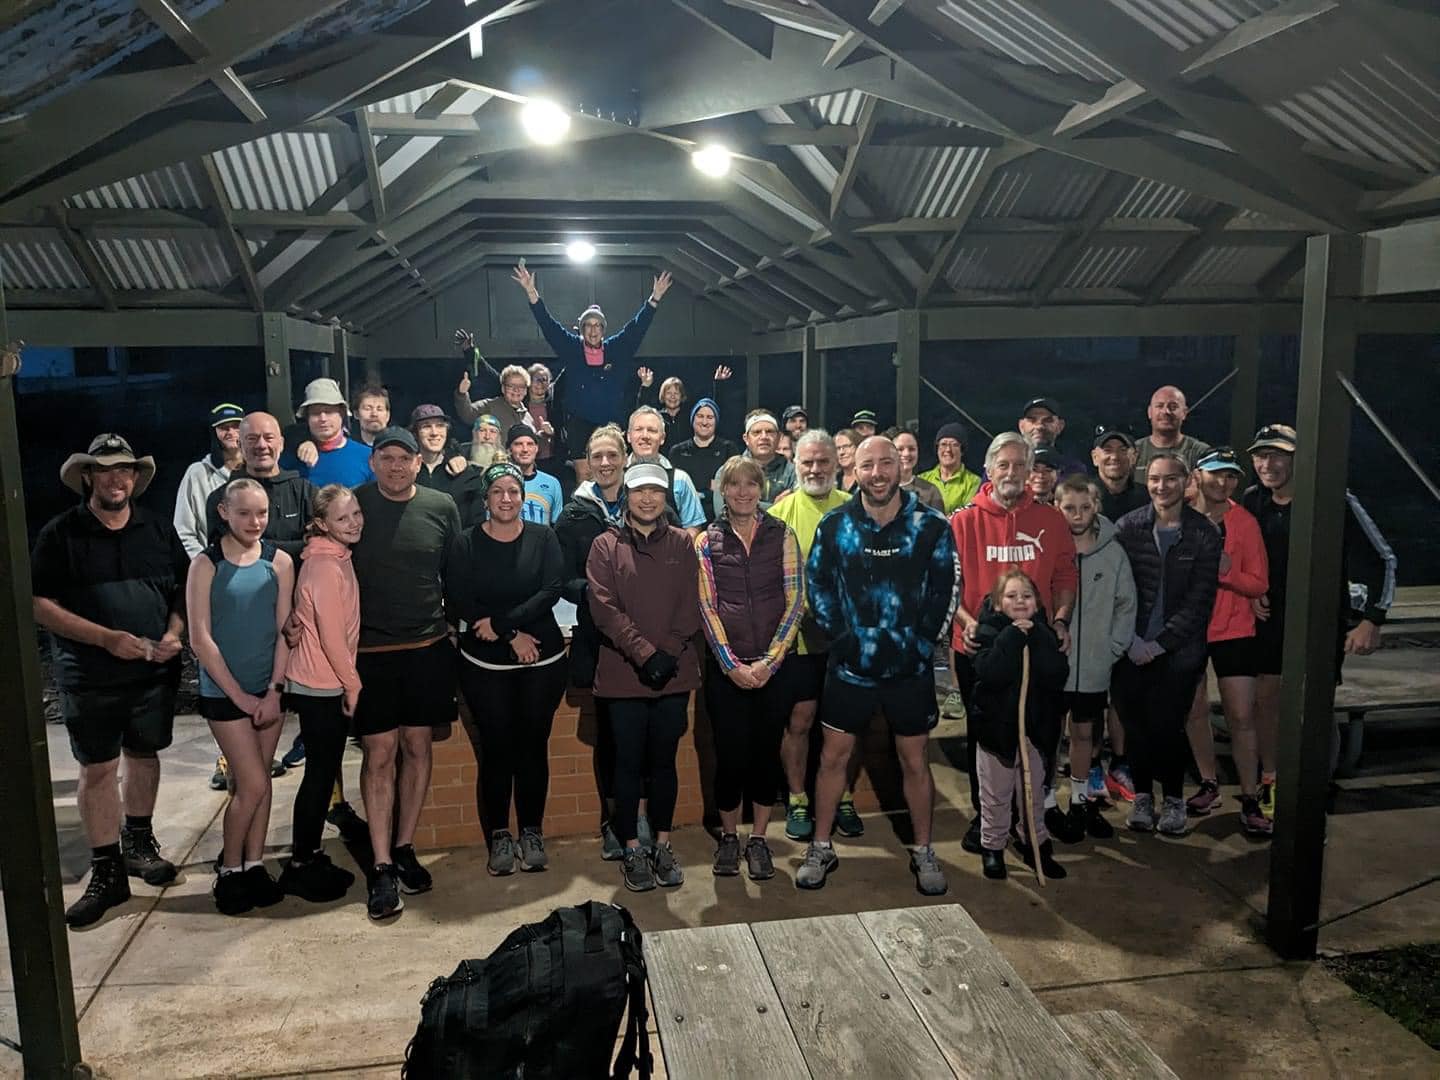 Group photo of all the runners at Warragul - Probably around 30 people